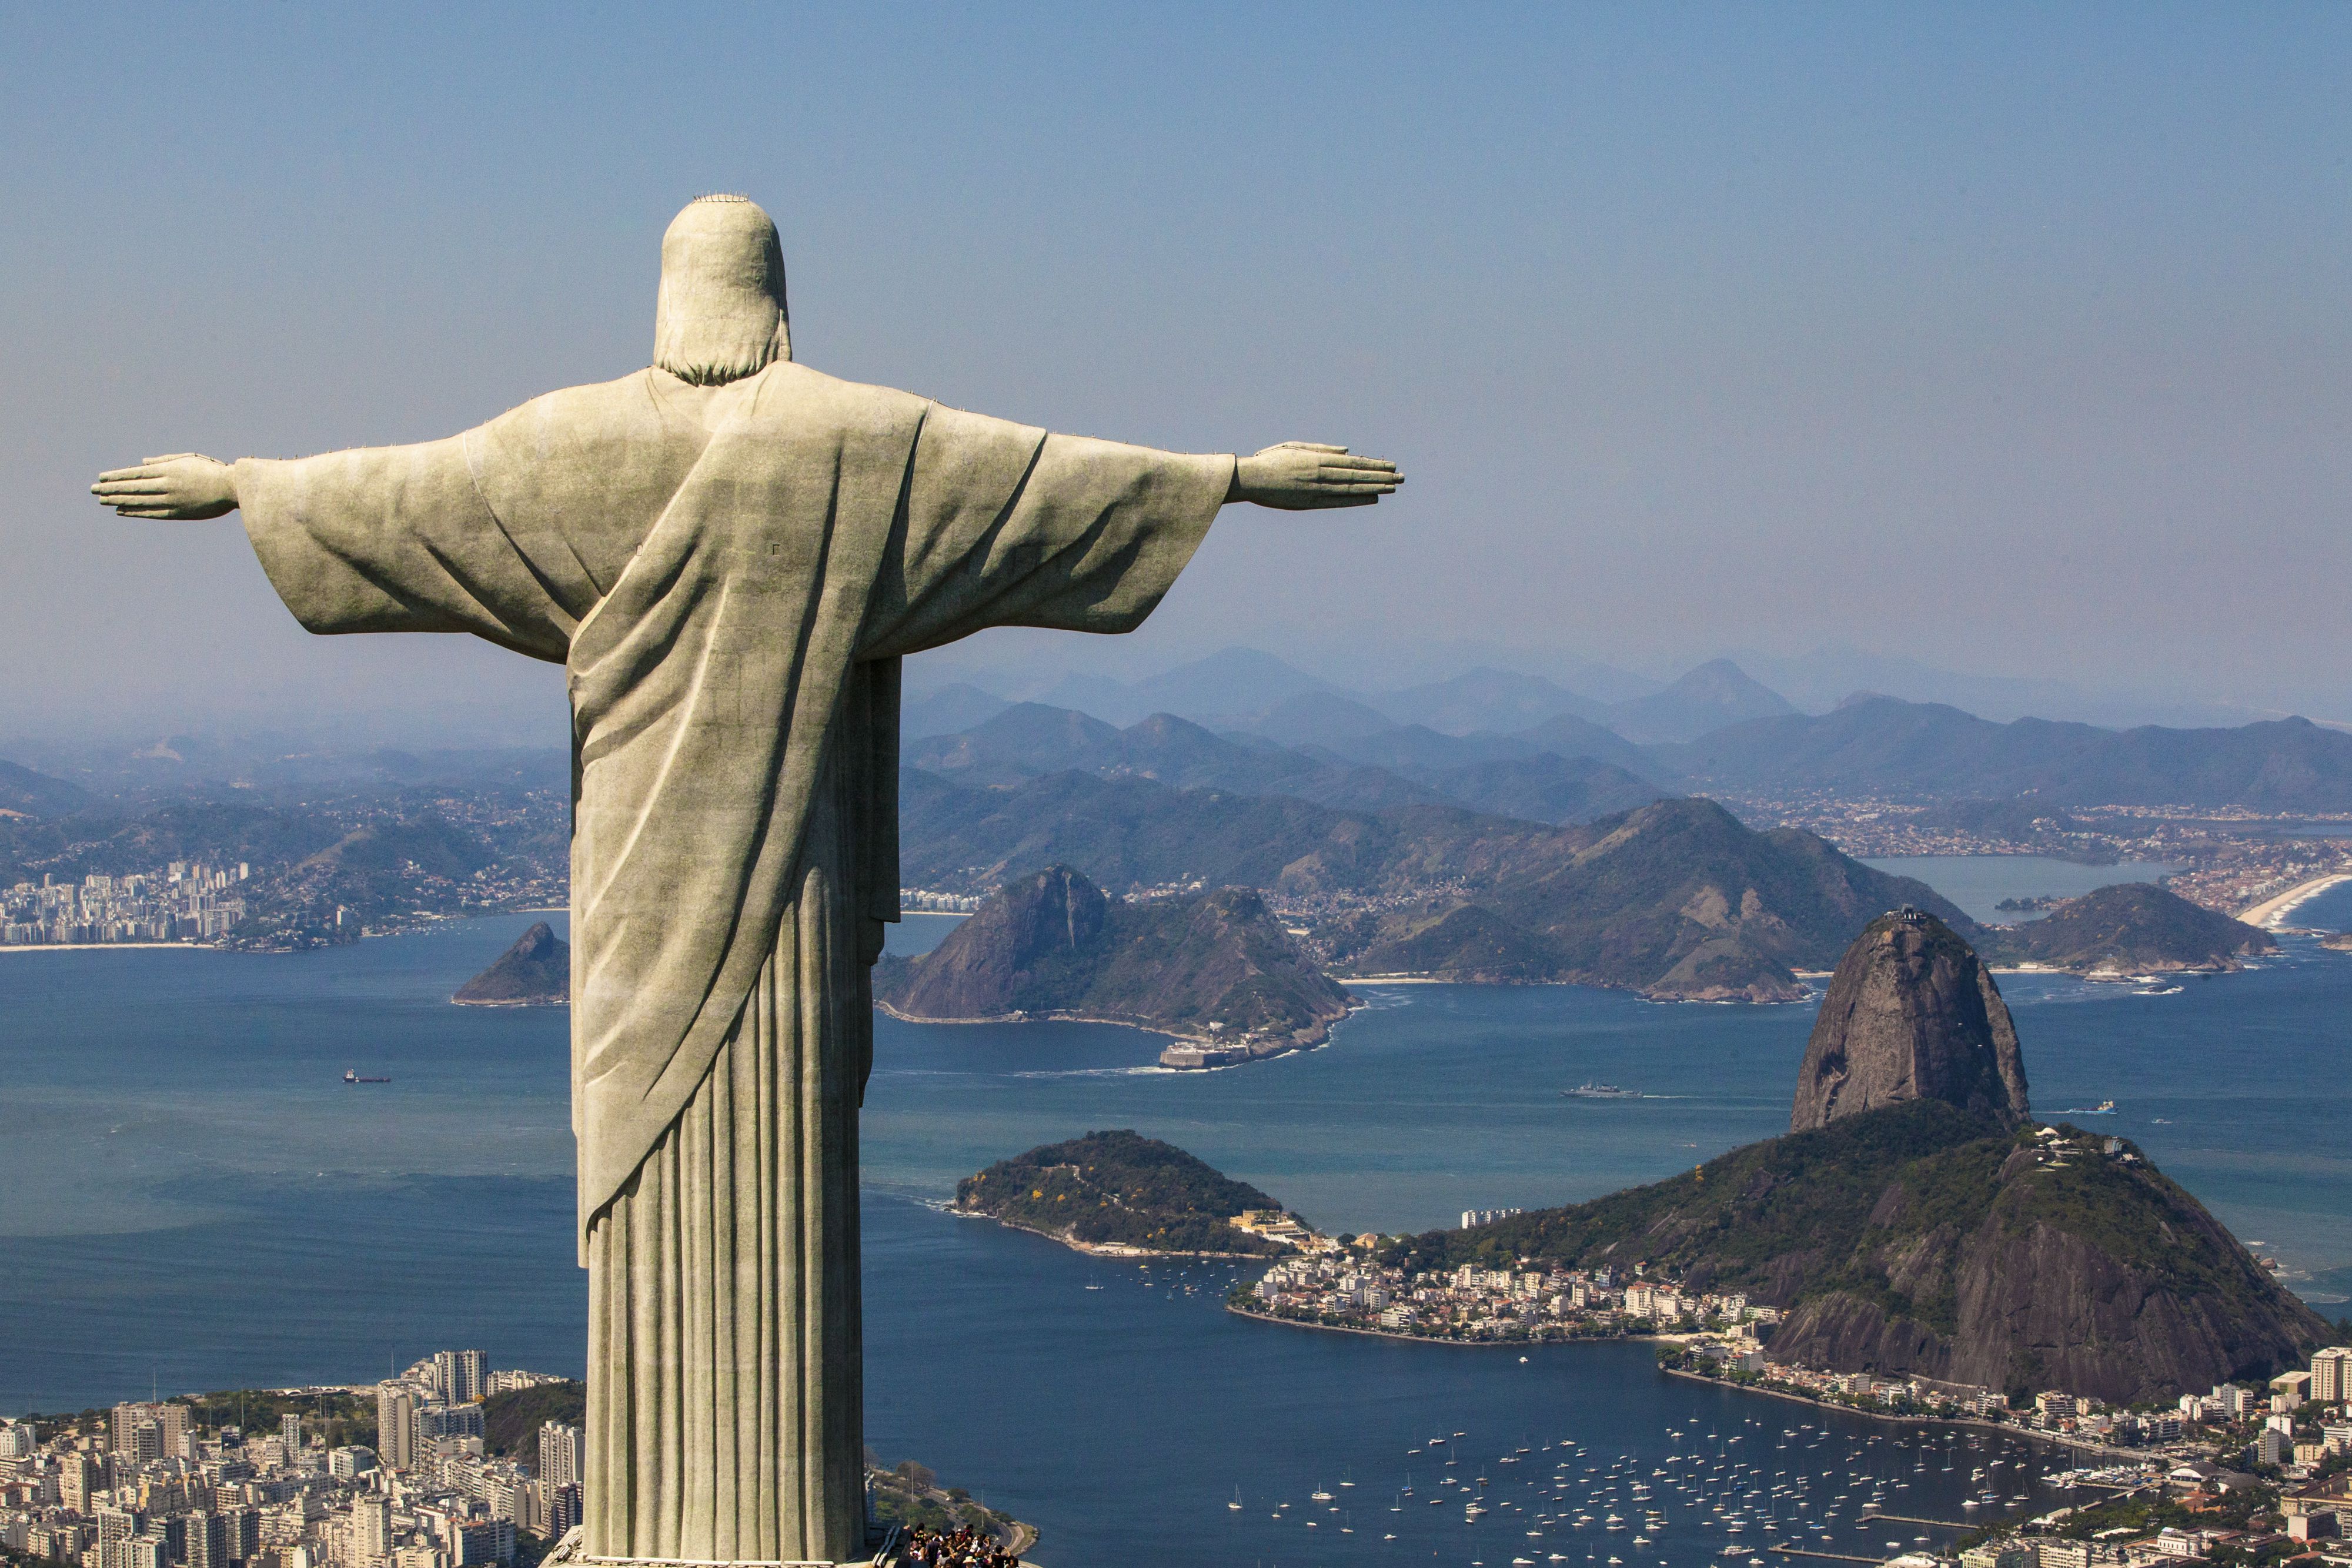 Fun fact: The T-pose emote is called Redeemer in Brazil,reference to  Christ the Redeemer Statue on Brazil : r/FortNiteBR